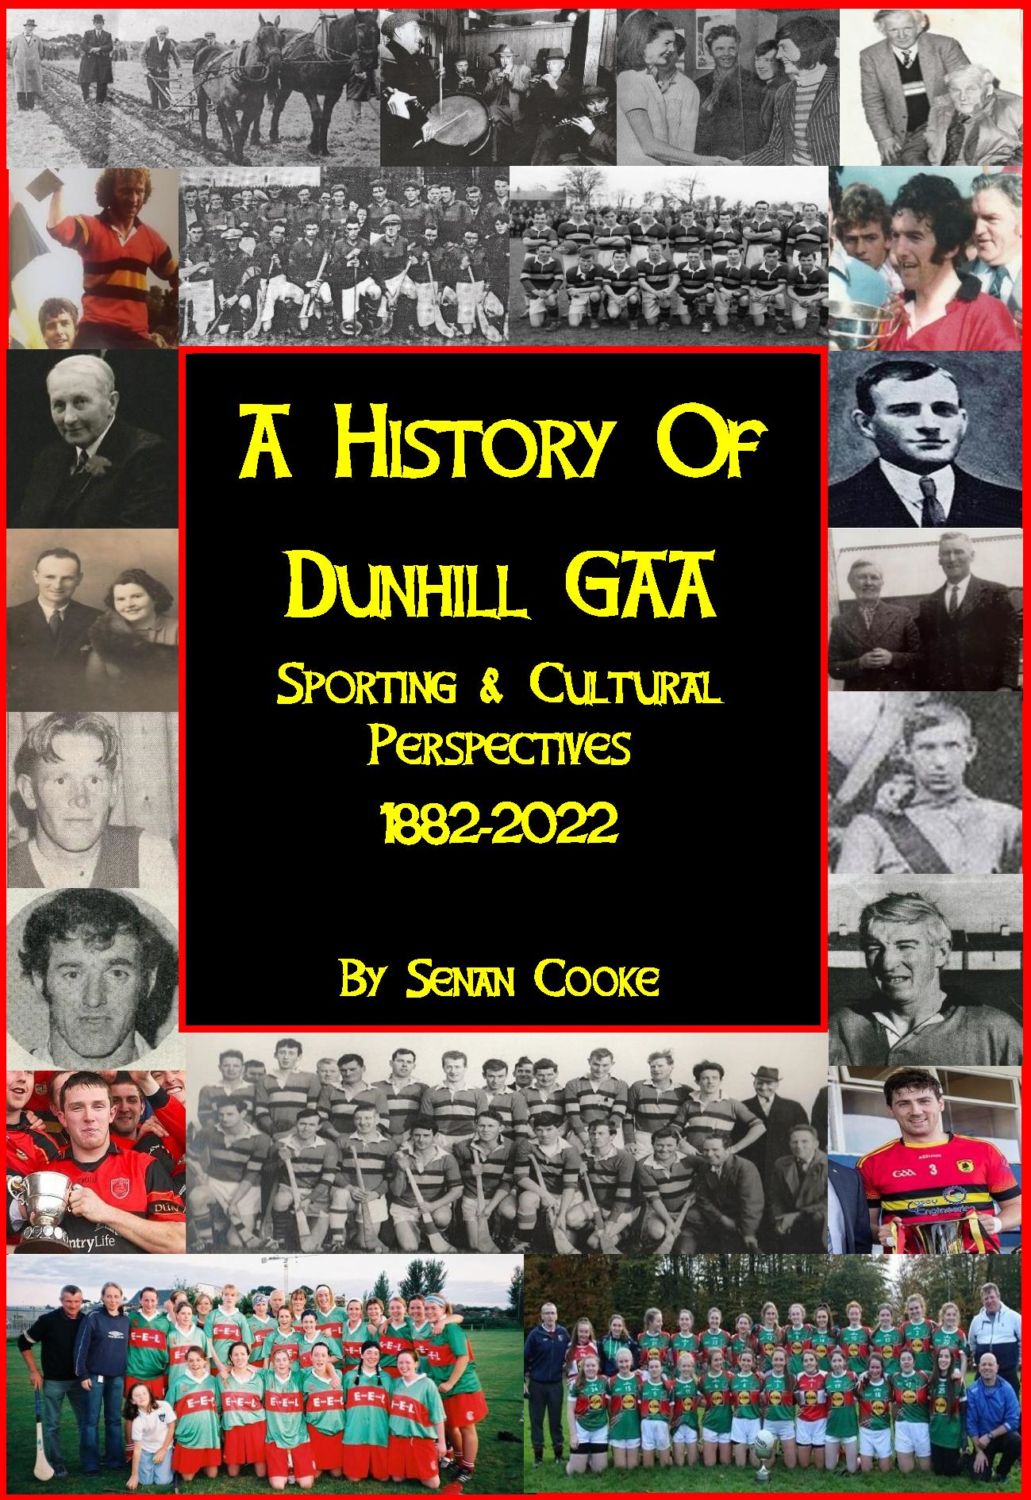 A History of Dunhill GAA – Sporting and Cultural Perspectives: 1882-2022 by Senan Cooke